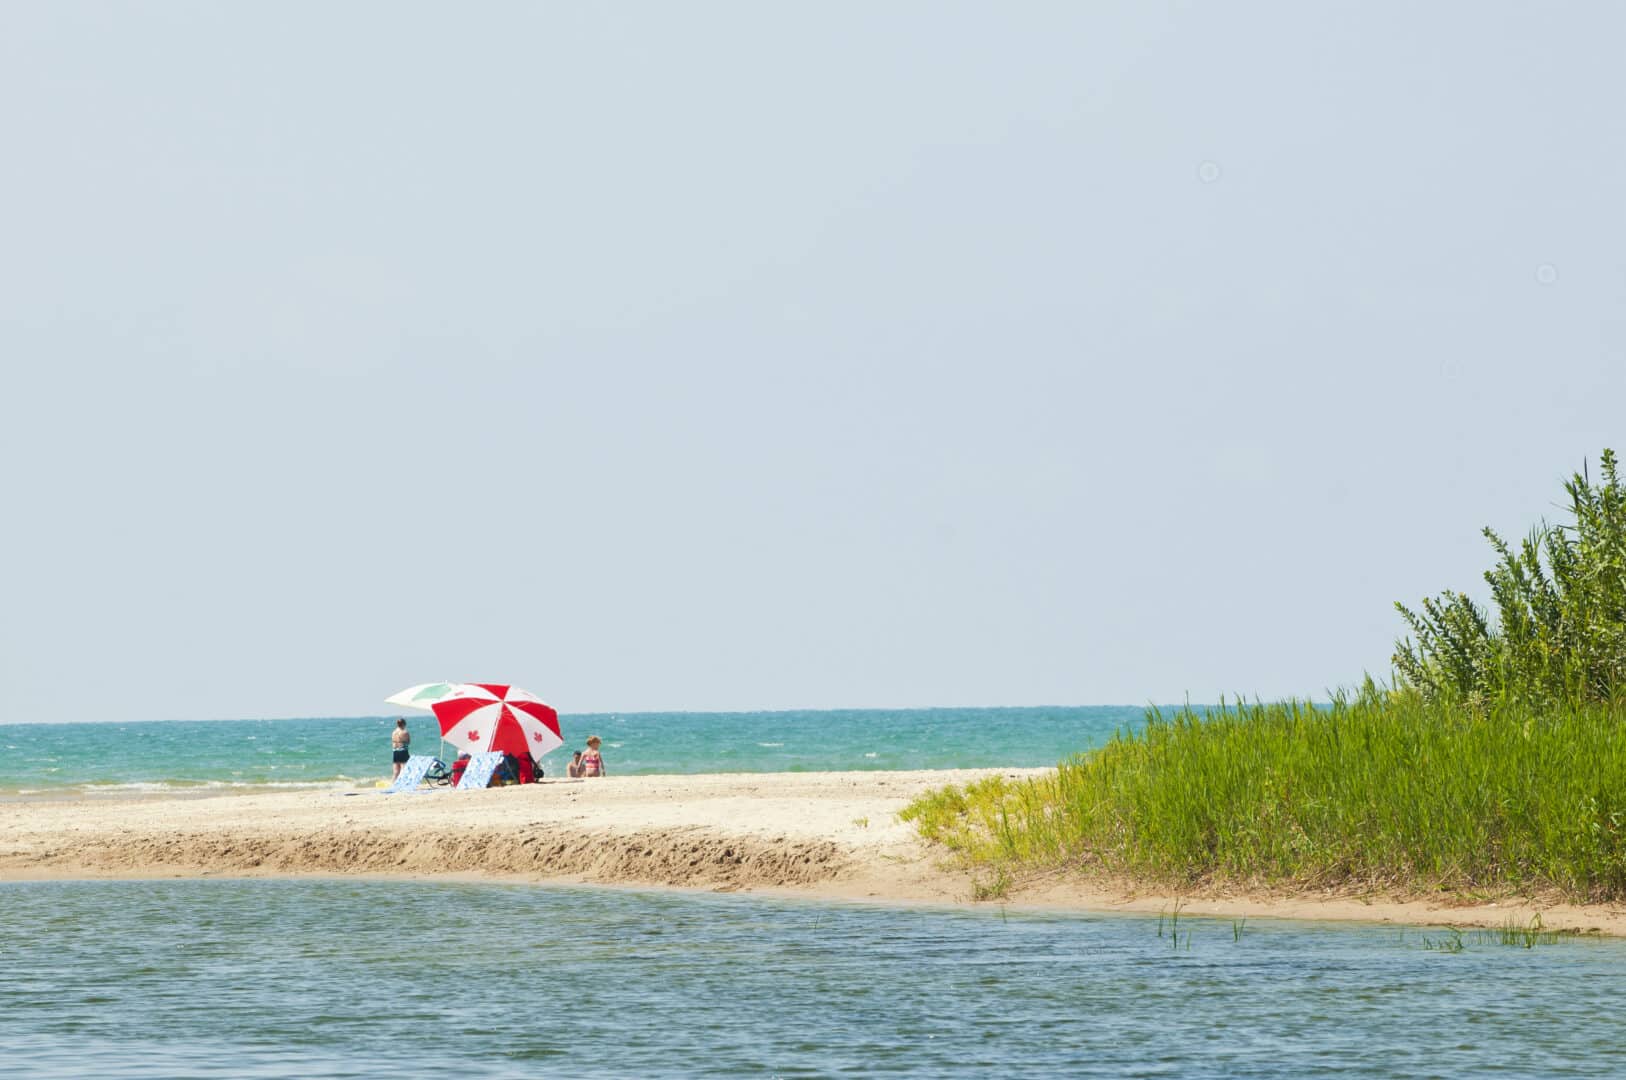 A family on a narrow, sandy beach with a Canada flag umbrella set up and beautiful blue water surrounding the sandy beach on both sides.